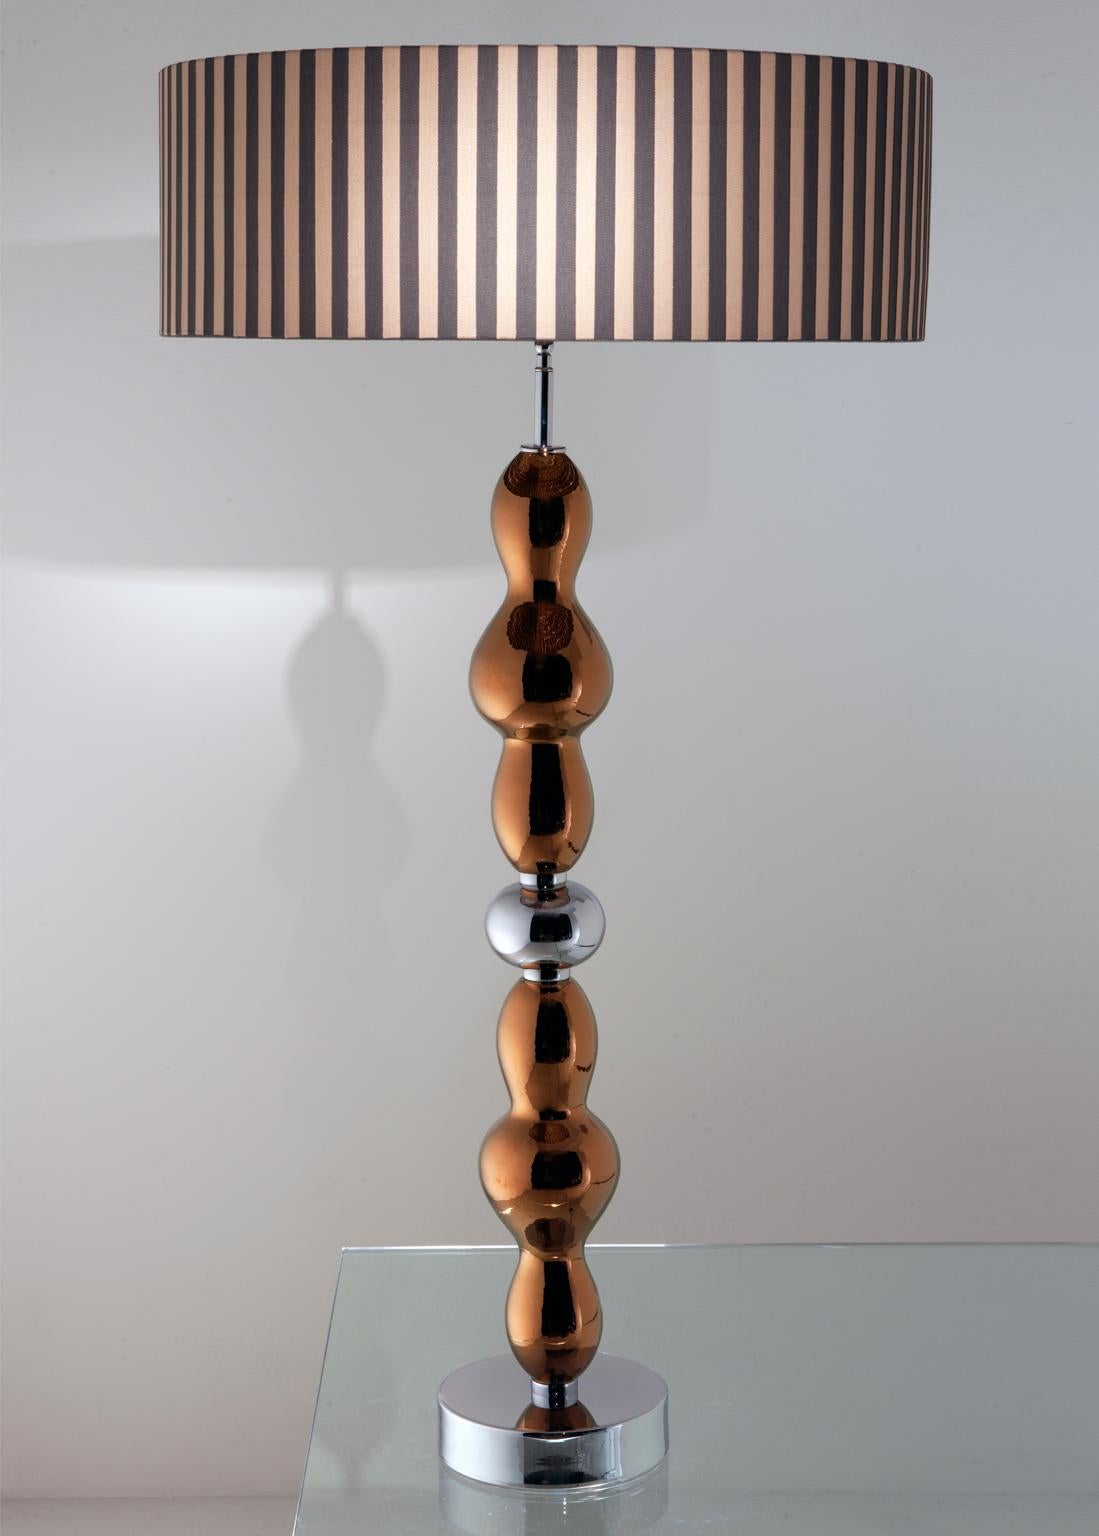 A simple and sophisticated choreography. Dancing, even in its formal essentiality. Ginger & Fred is a family made of standing lamps, table lamps and suspension lamps. Created in ceramic, an artisanal production which highlights a great artistry,